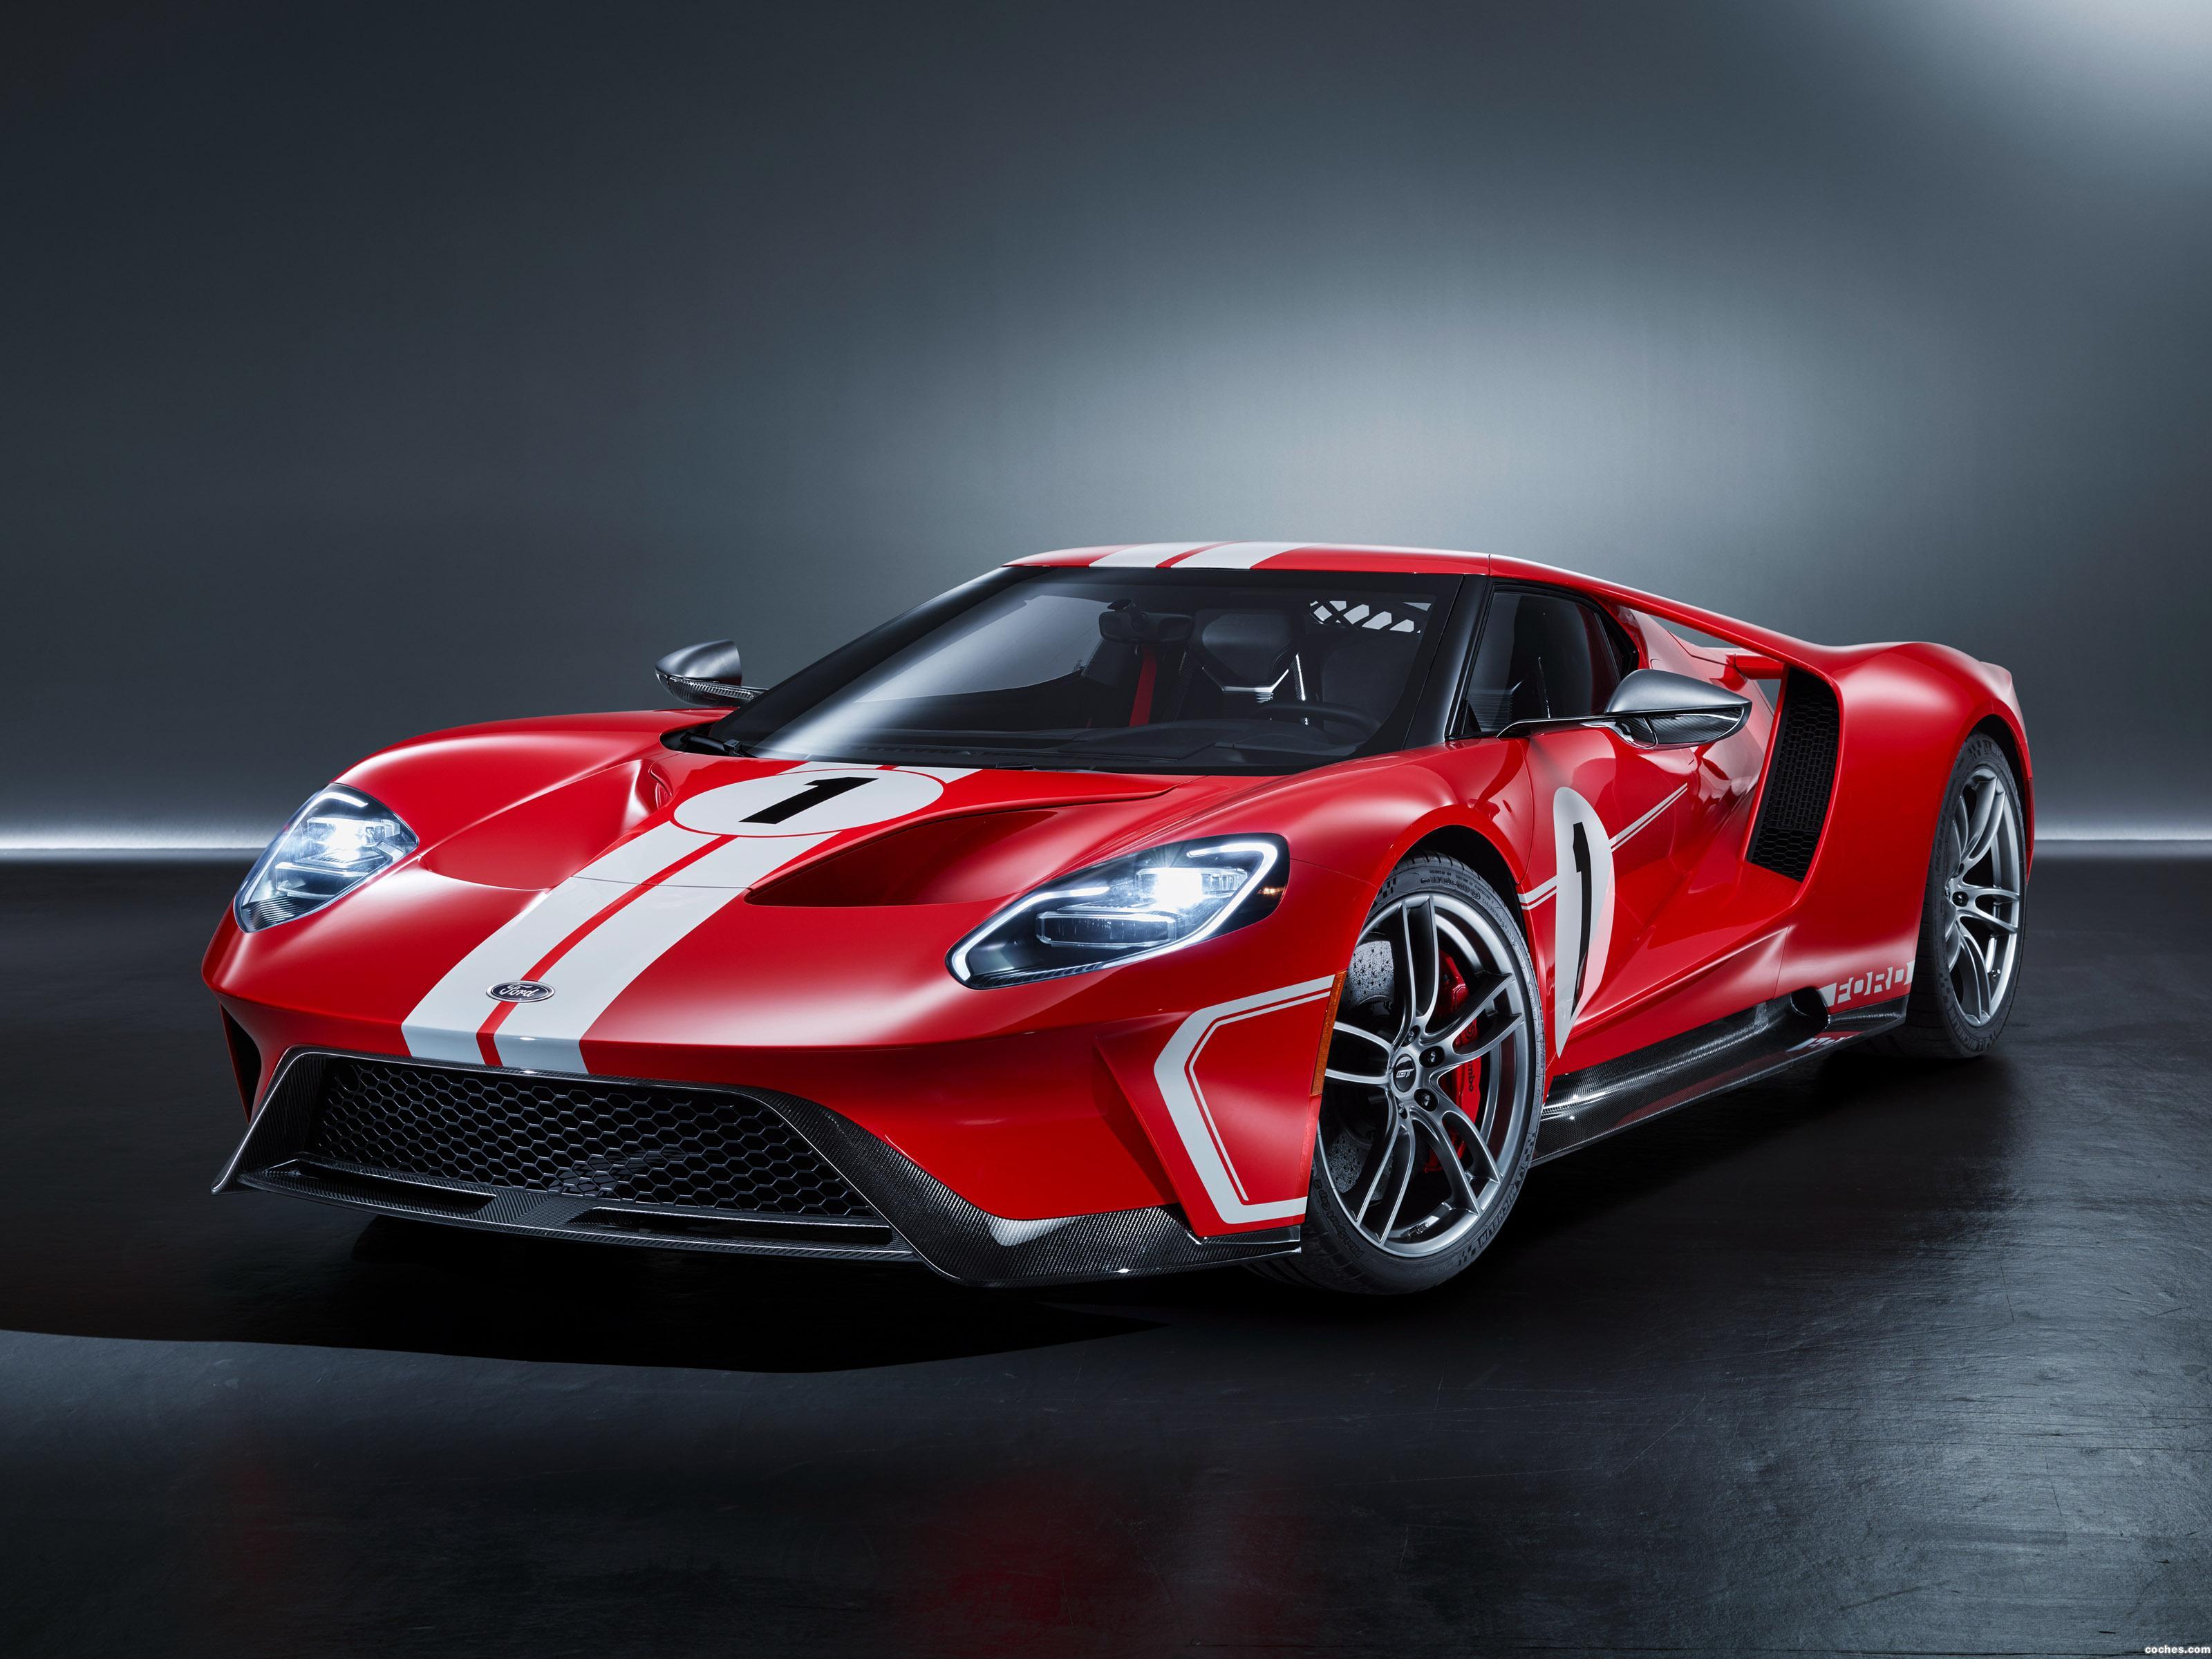 ford_gt-67-heritage-edition-2017_r4.jpg